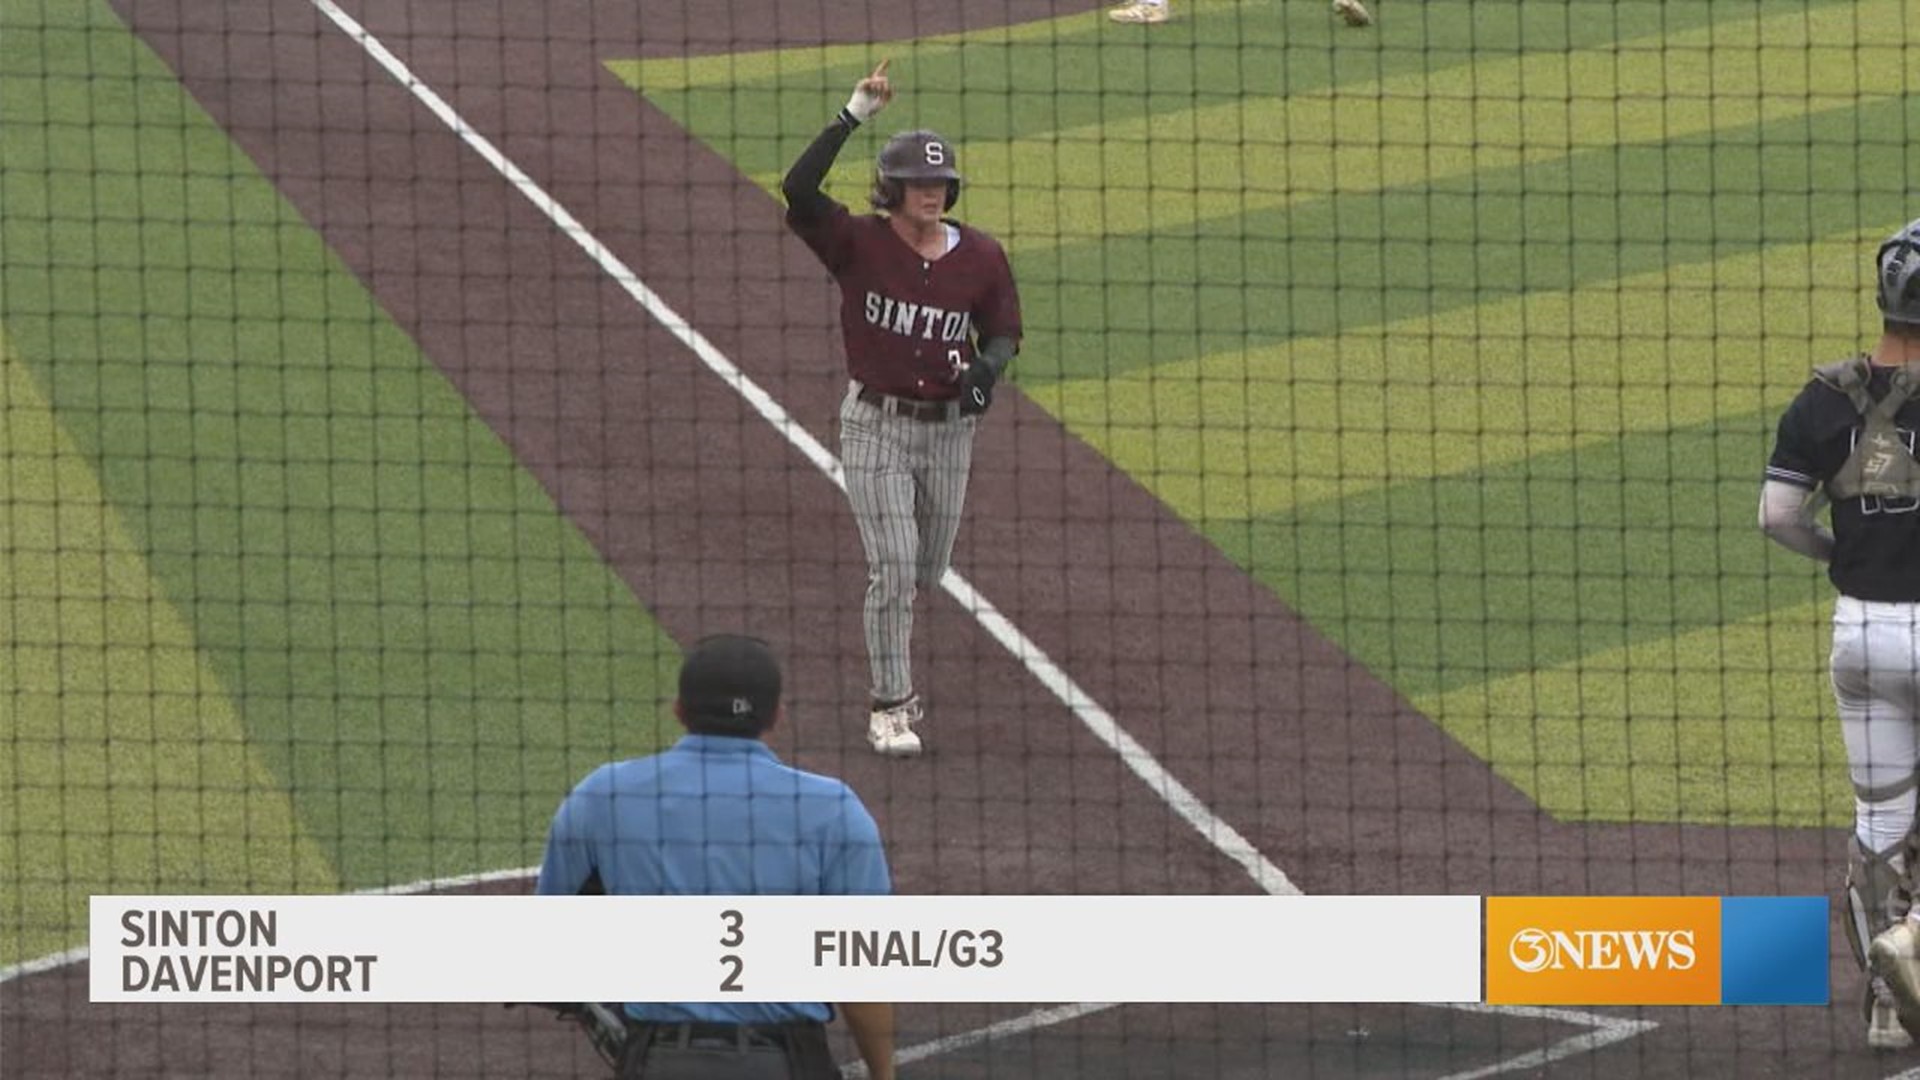 Sinton took the first punch game one, but rallied in game two and three